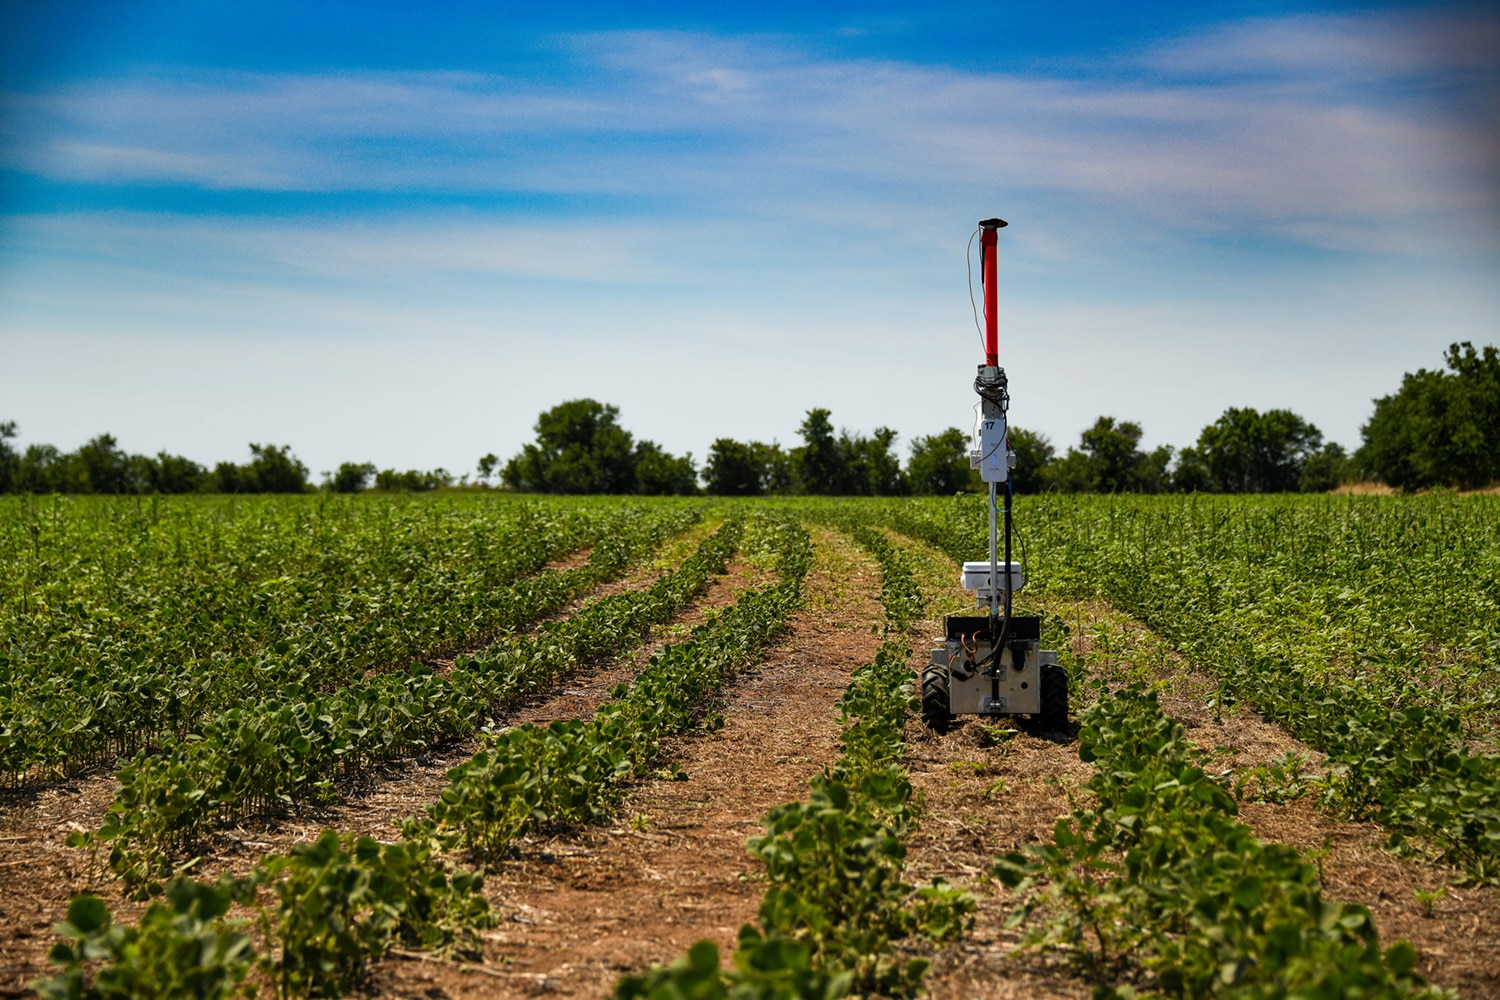 Weed-killing robot to combat weeds economically and avoid pesticides.